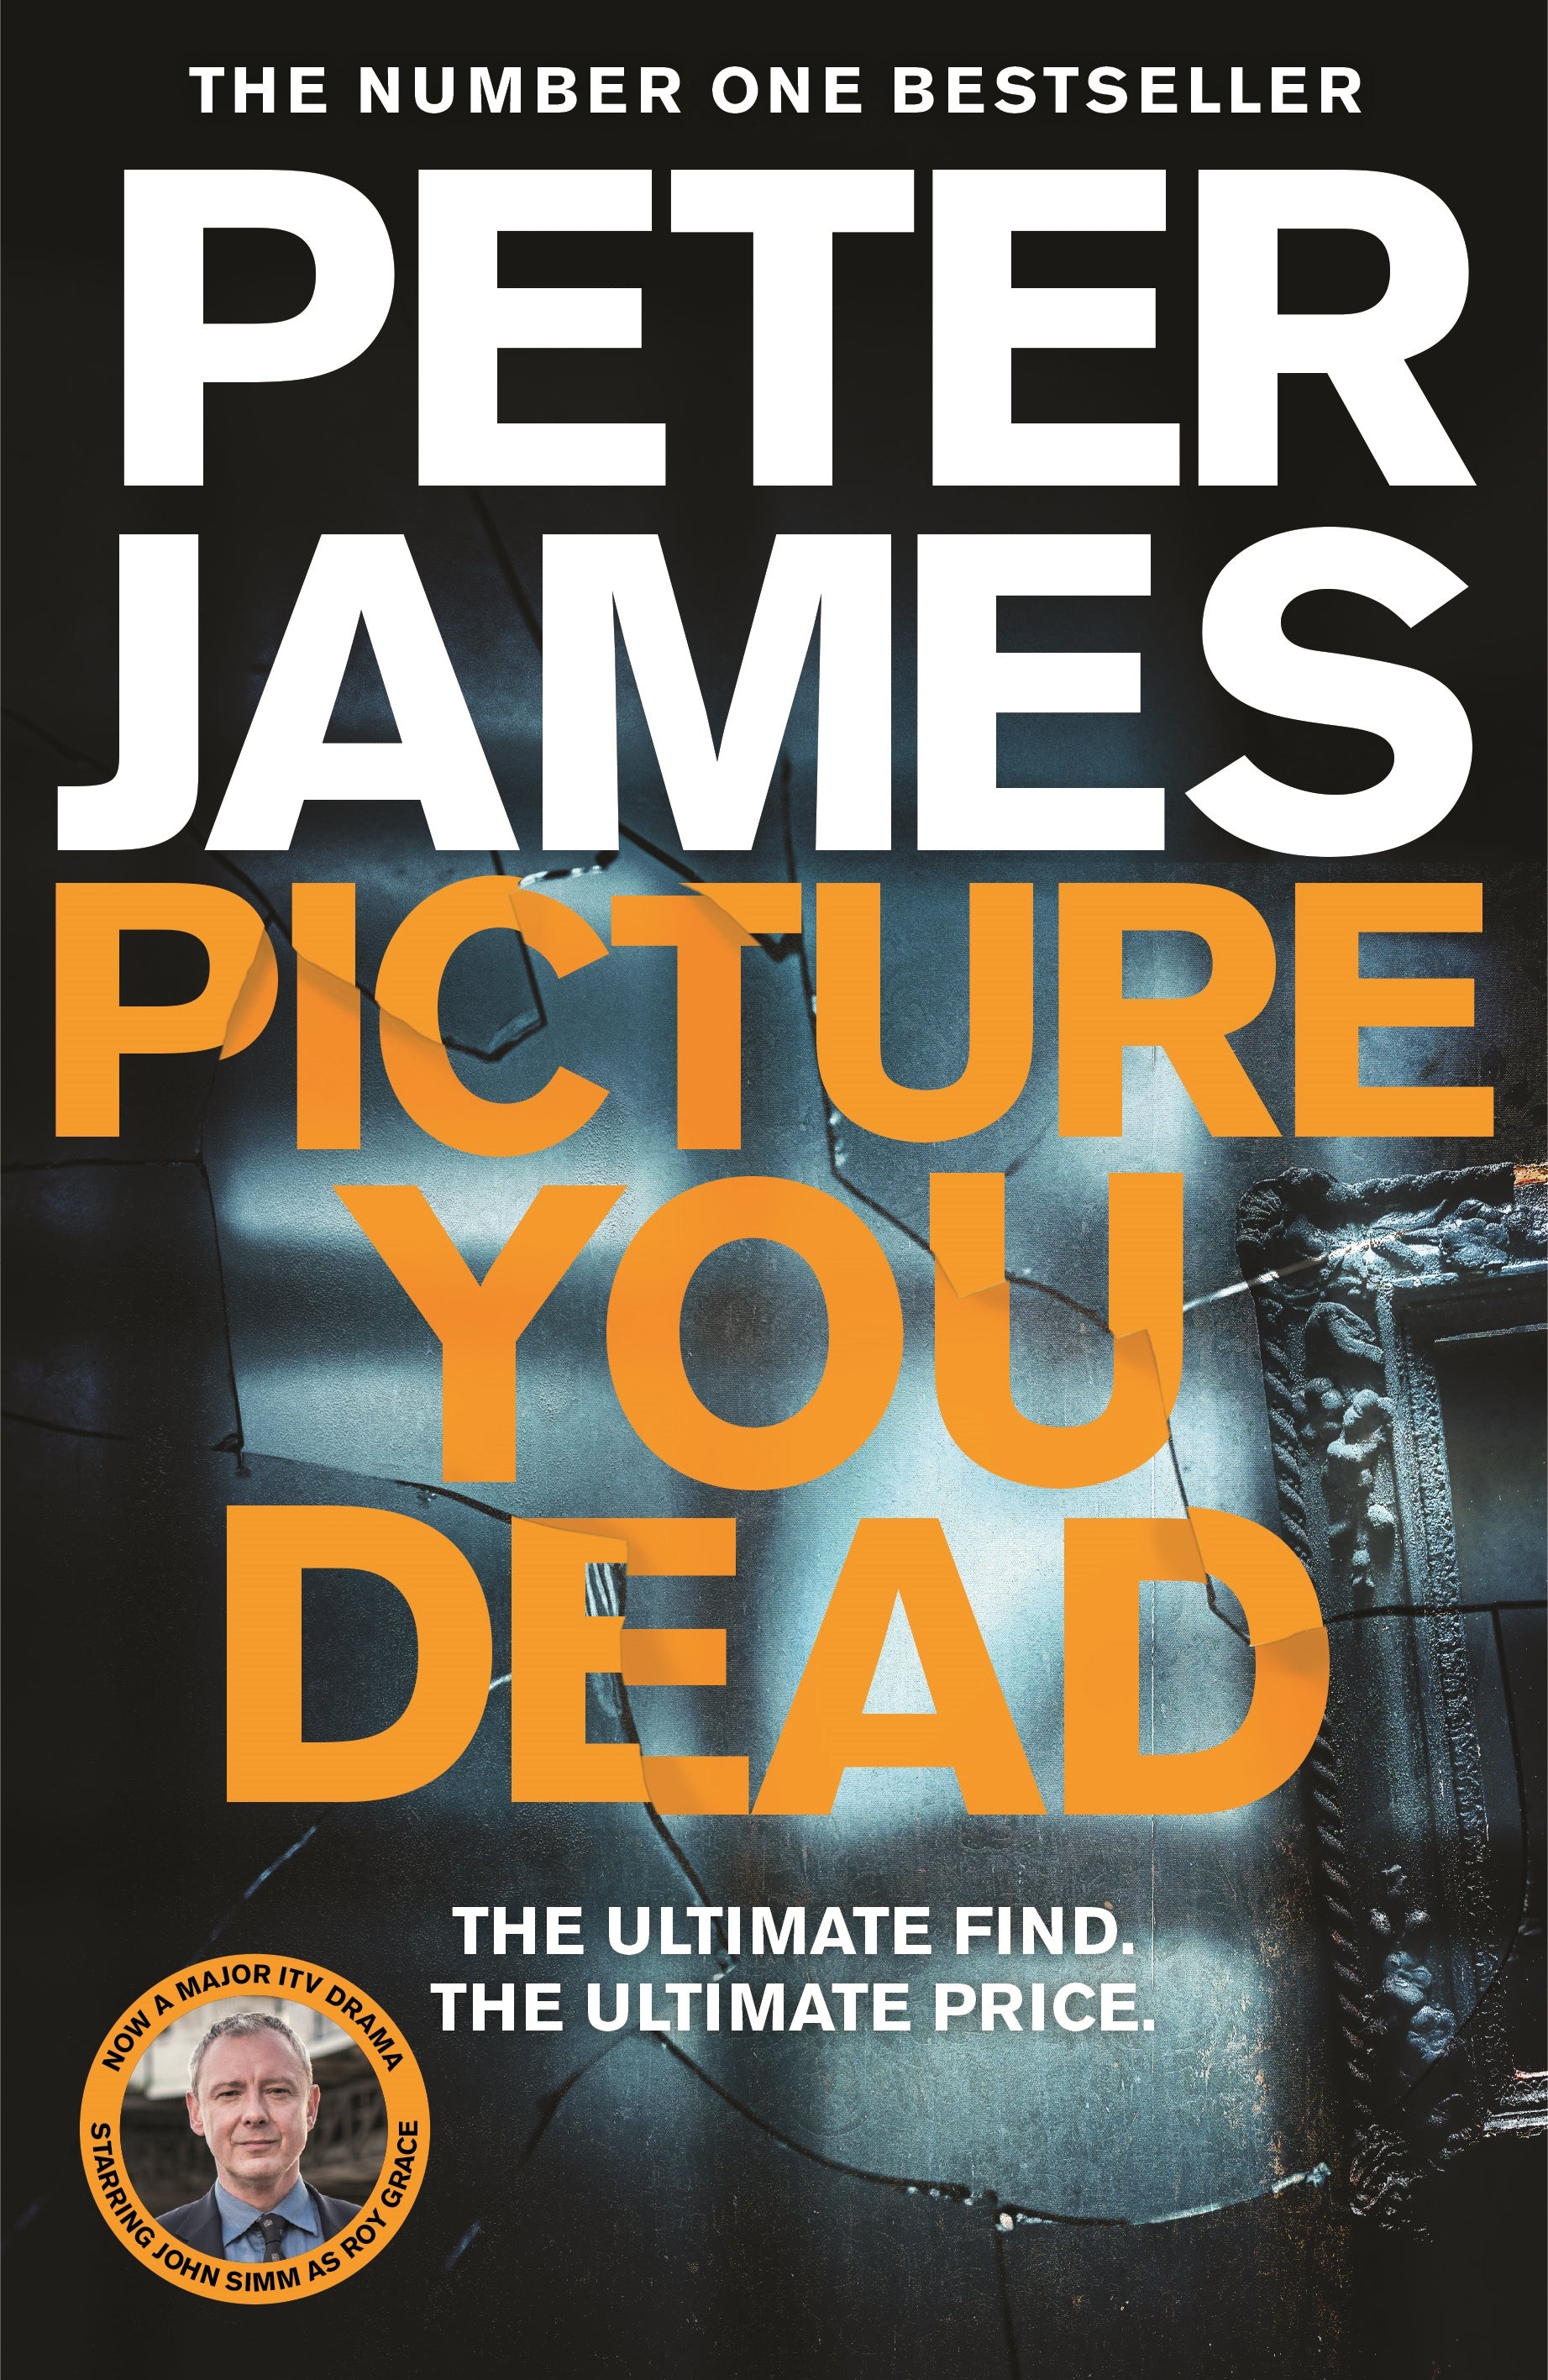 Talk and signing with Peter James - Picture You Dead 28/9/22